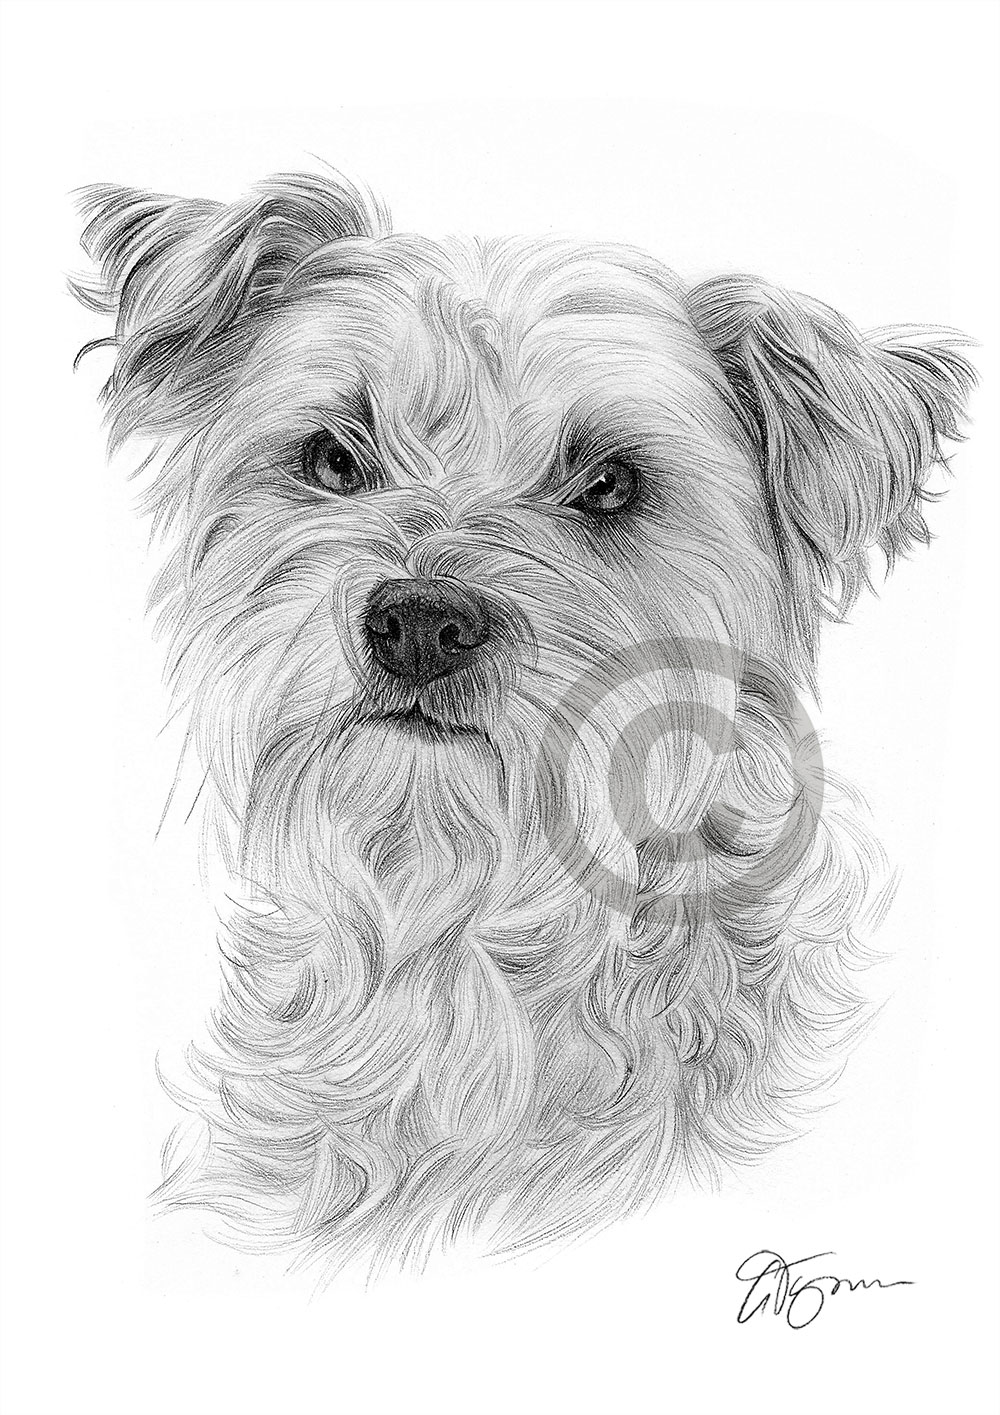 Pencil drawing of a cairn terrier by artist Gary Tymon